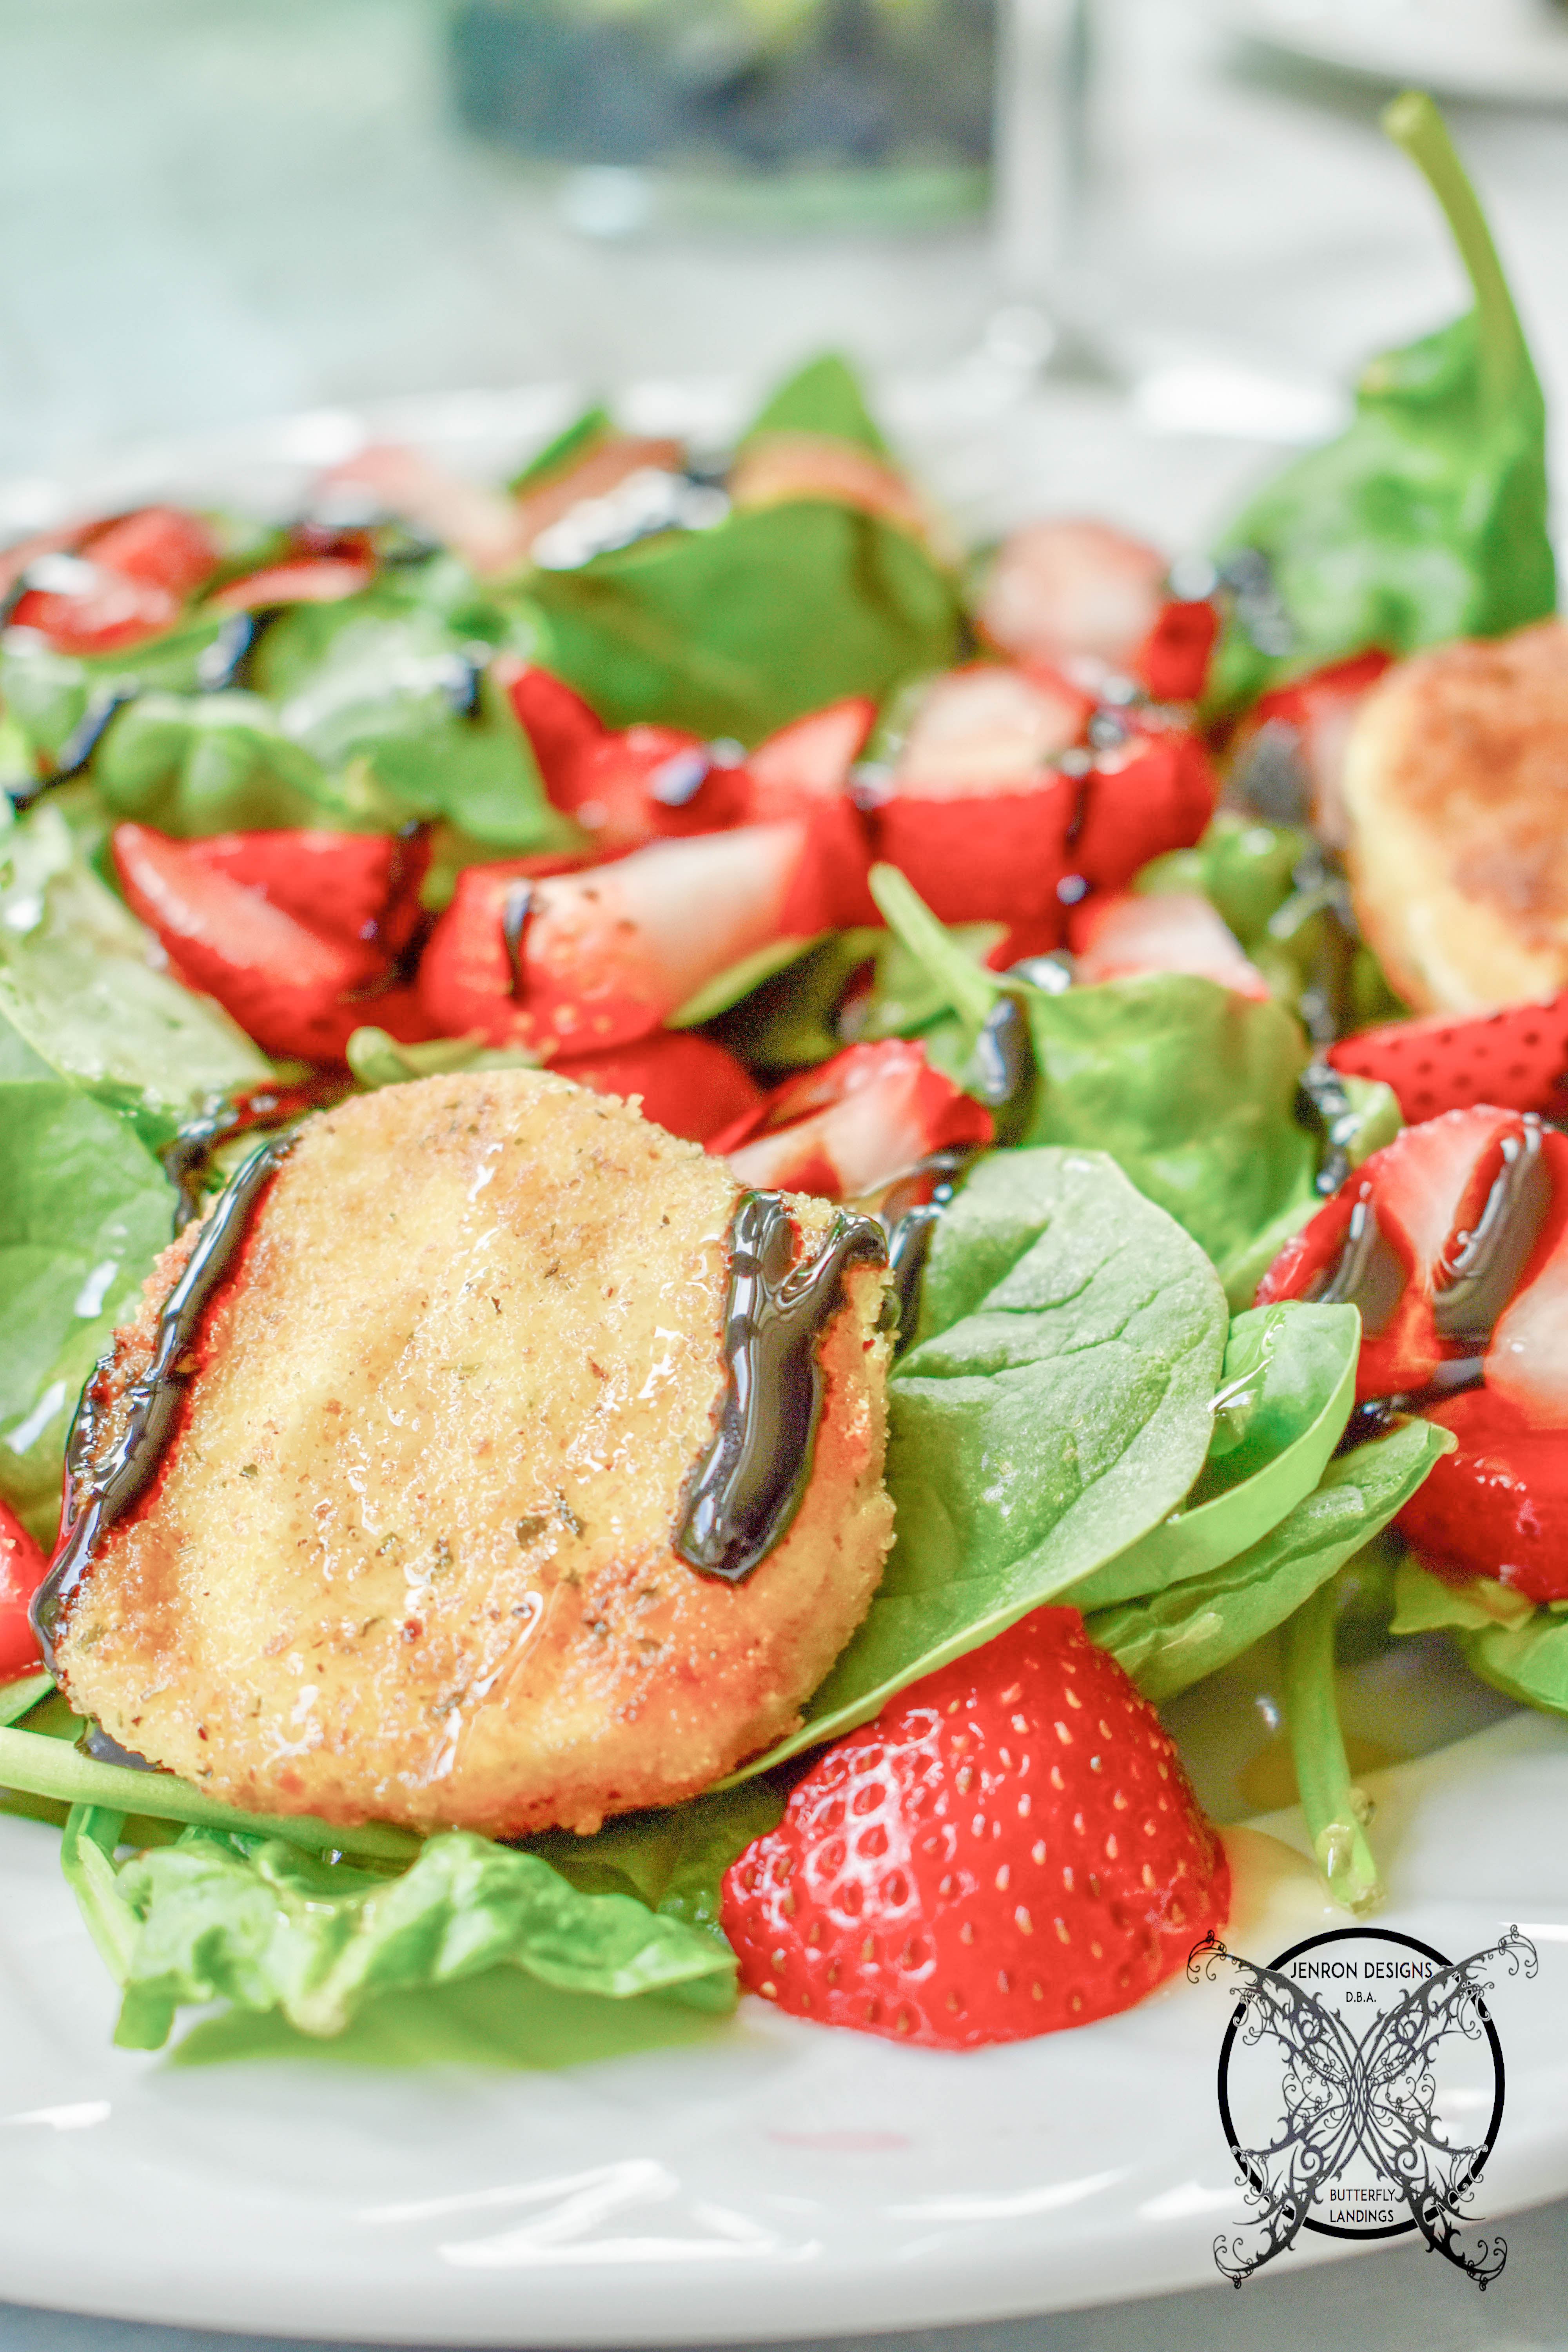 Strawberry & Fried Goat Cheese Salad | JENRON DESIGNS